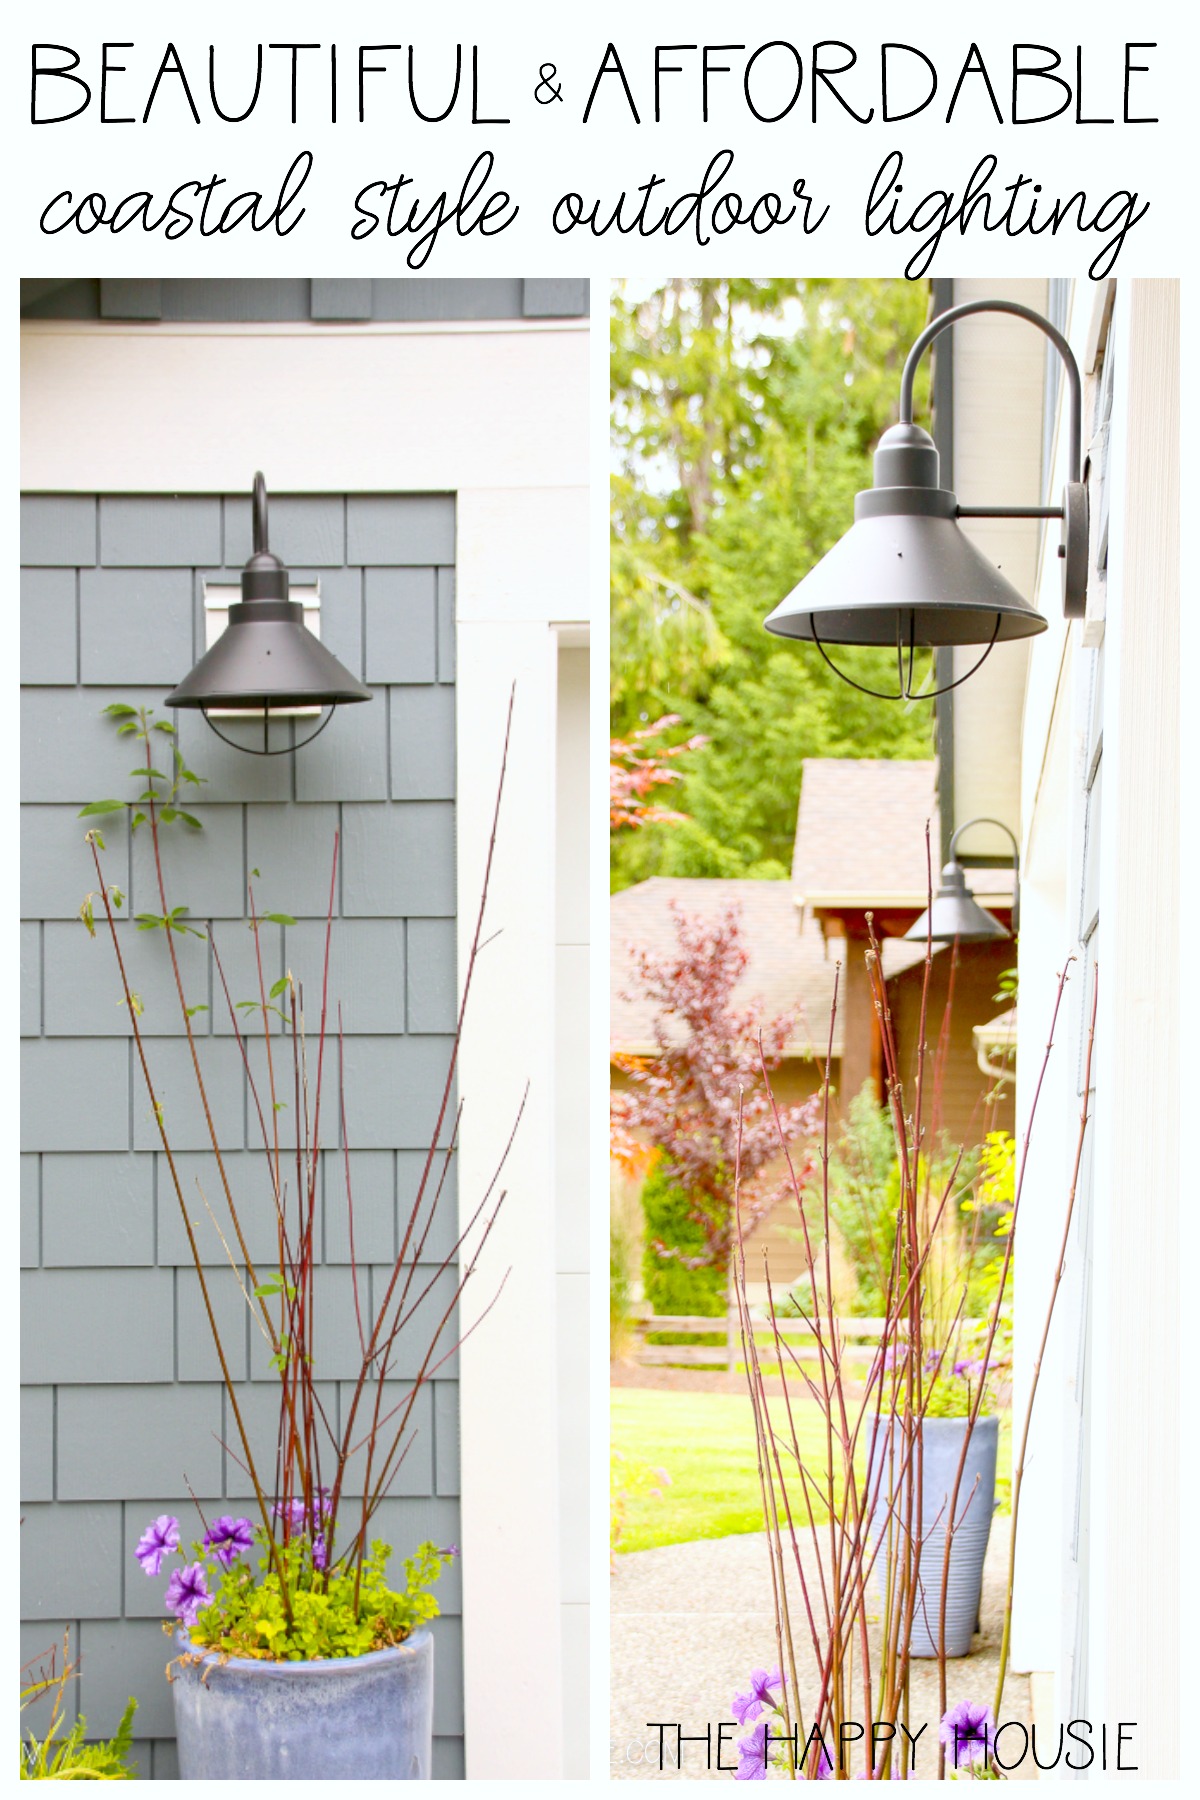 Beautiful & Affordable Coastal Style Outdoor Lighting graphic.